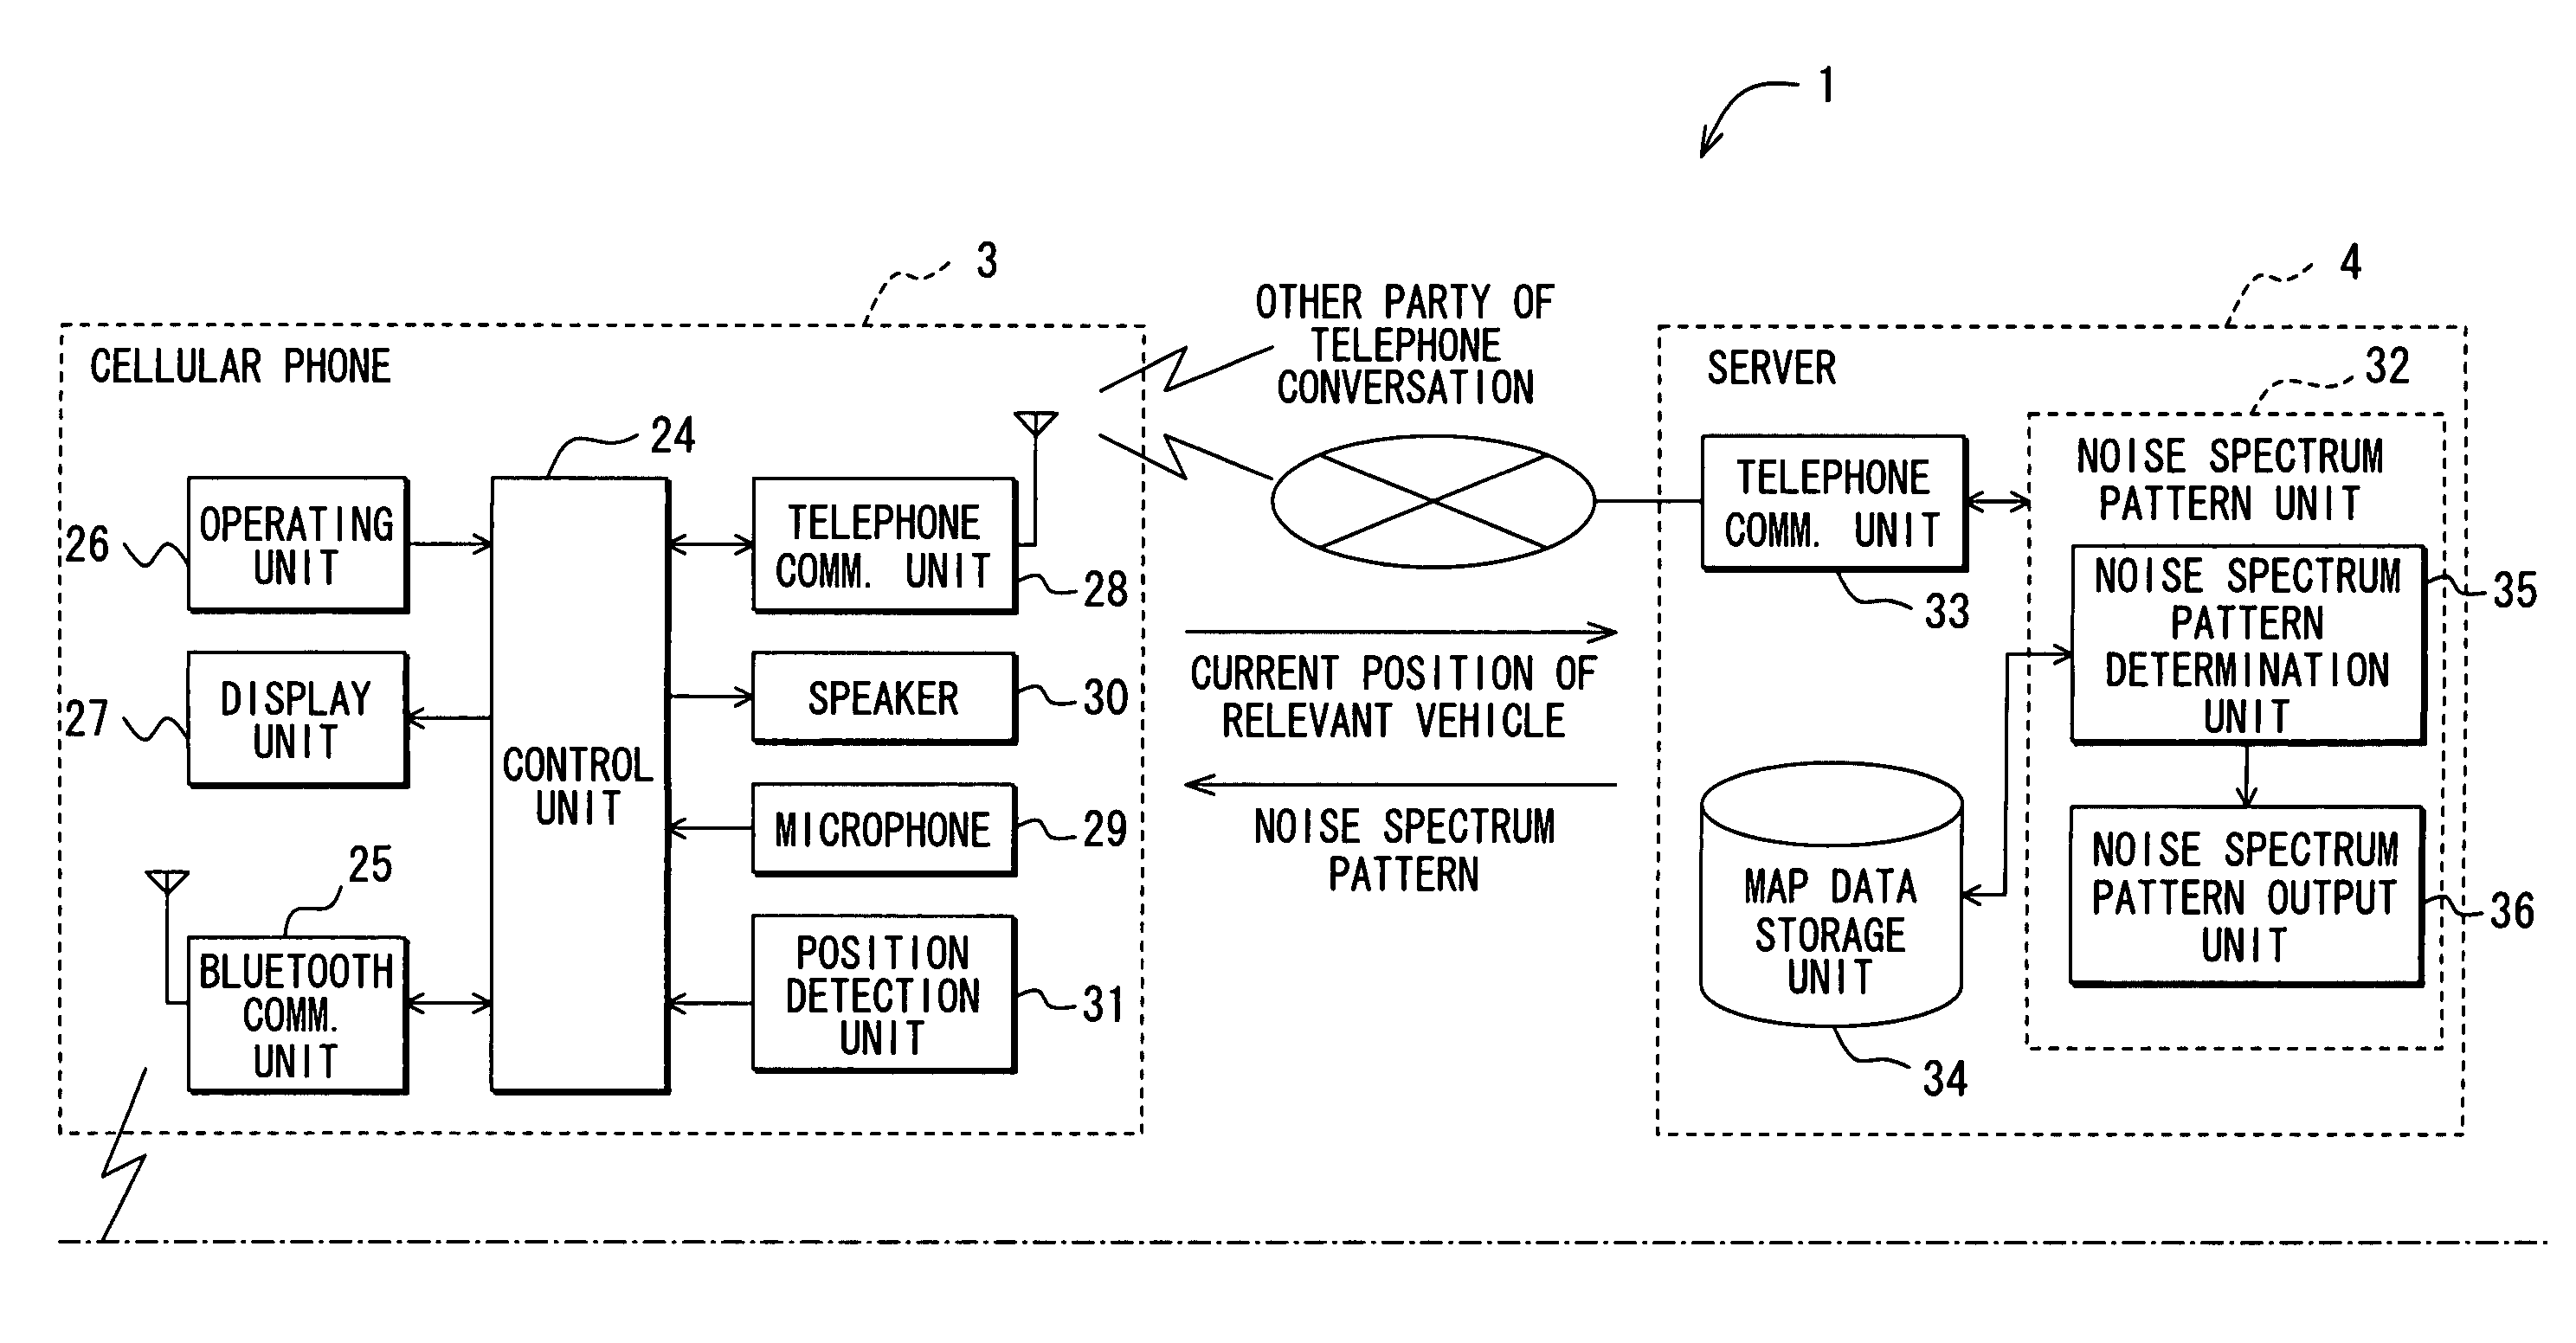 Communicating road noise control system, in-vehicle road noise controller, and server